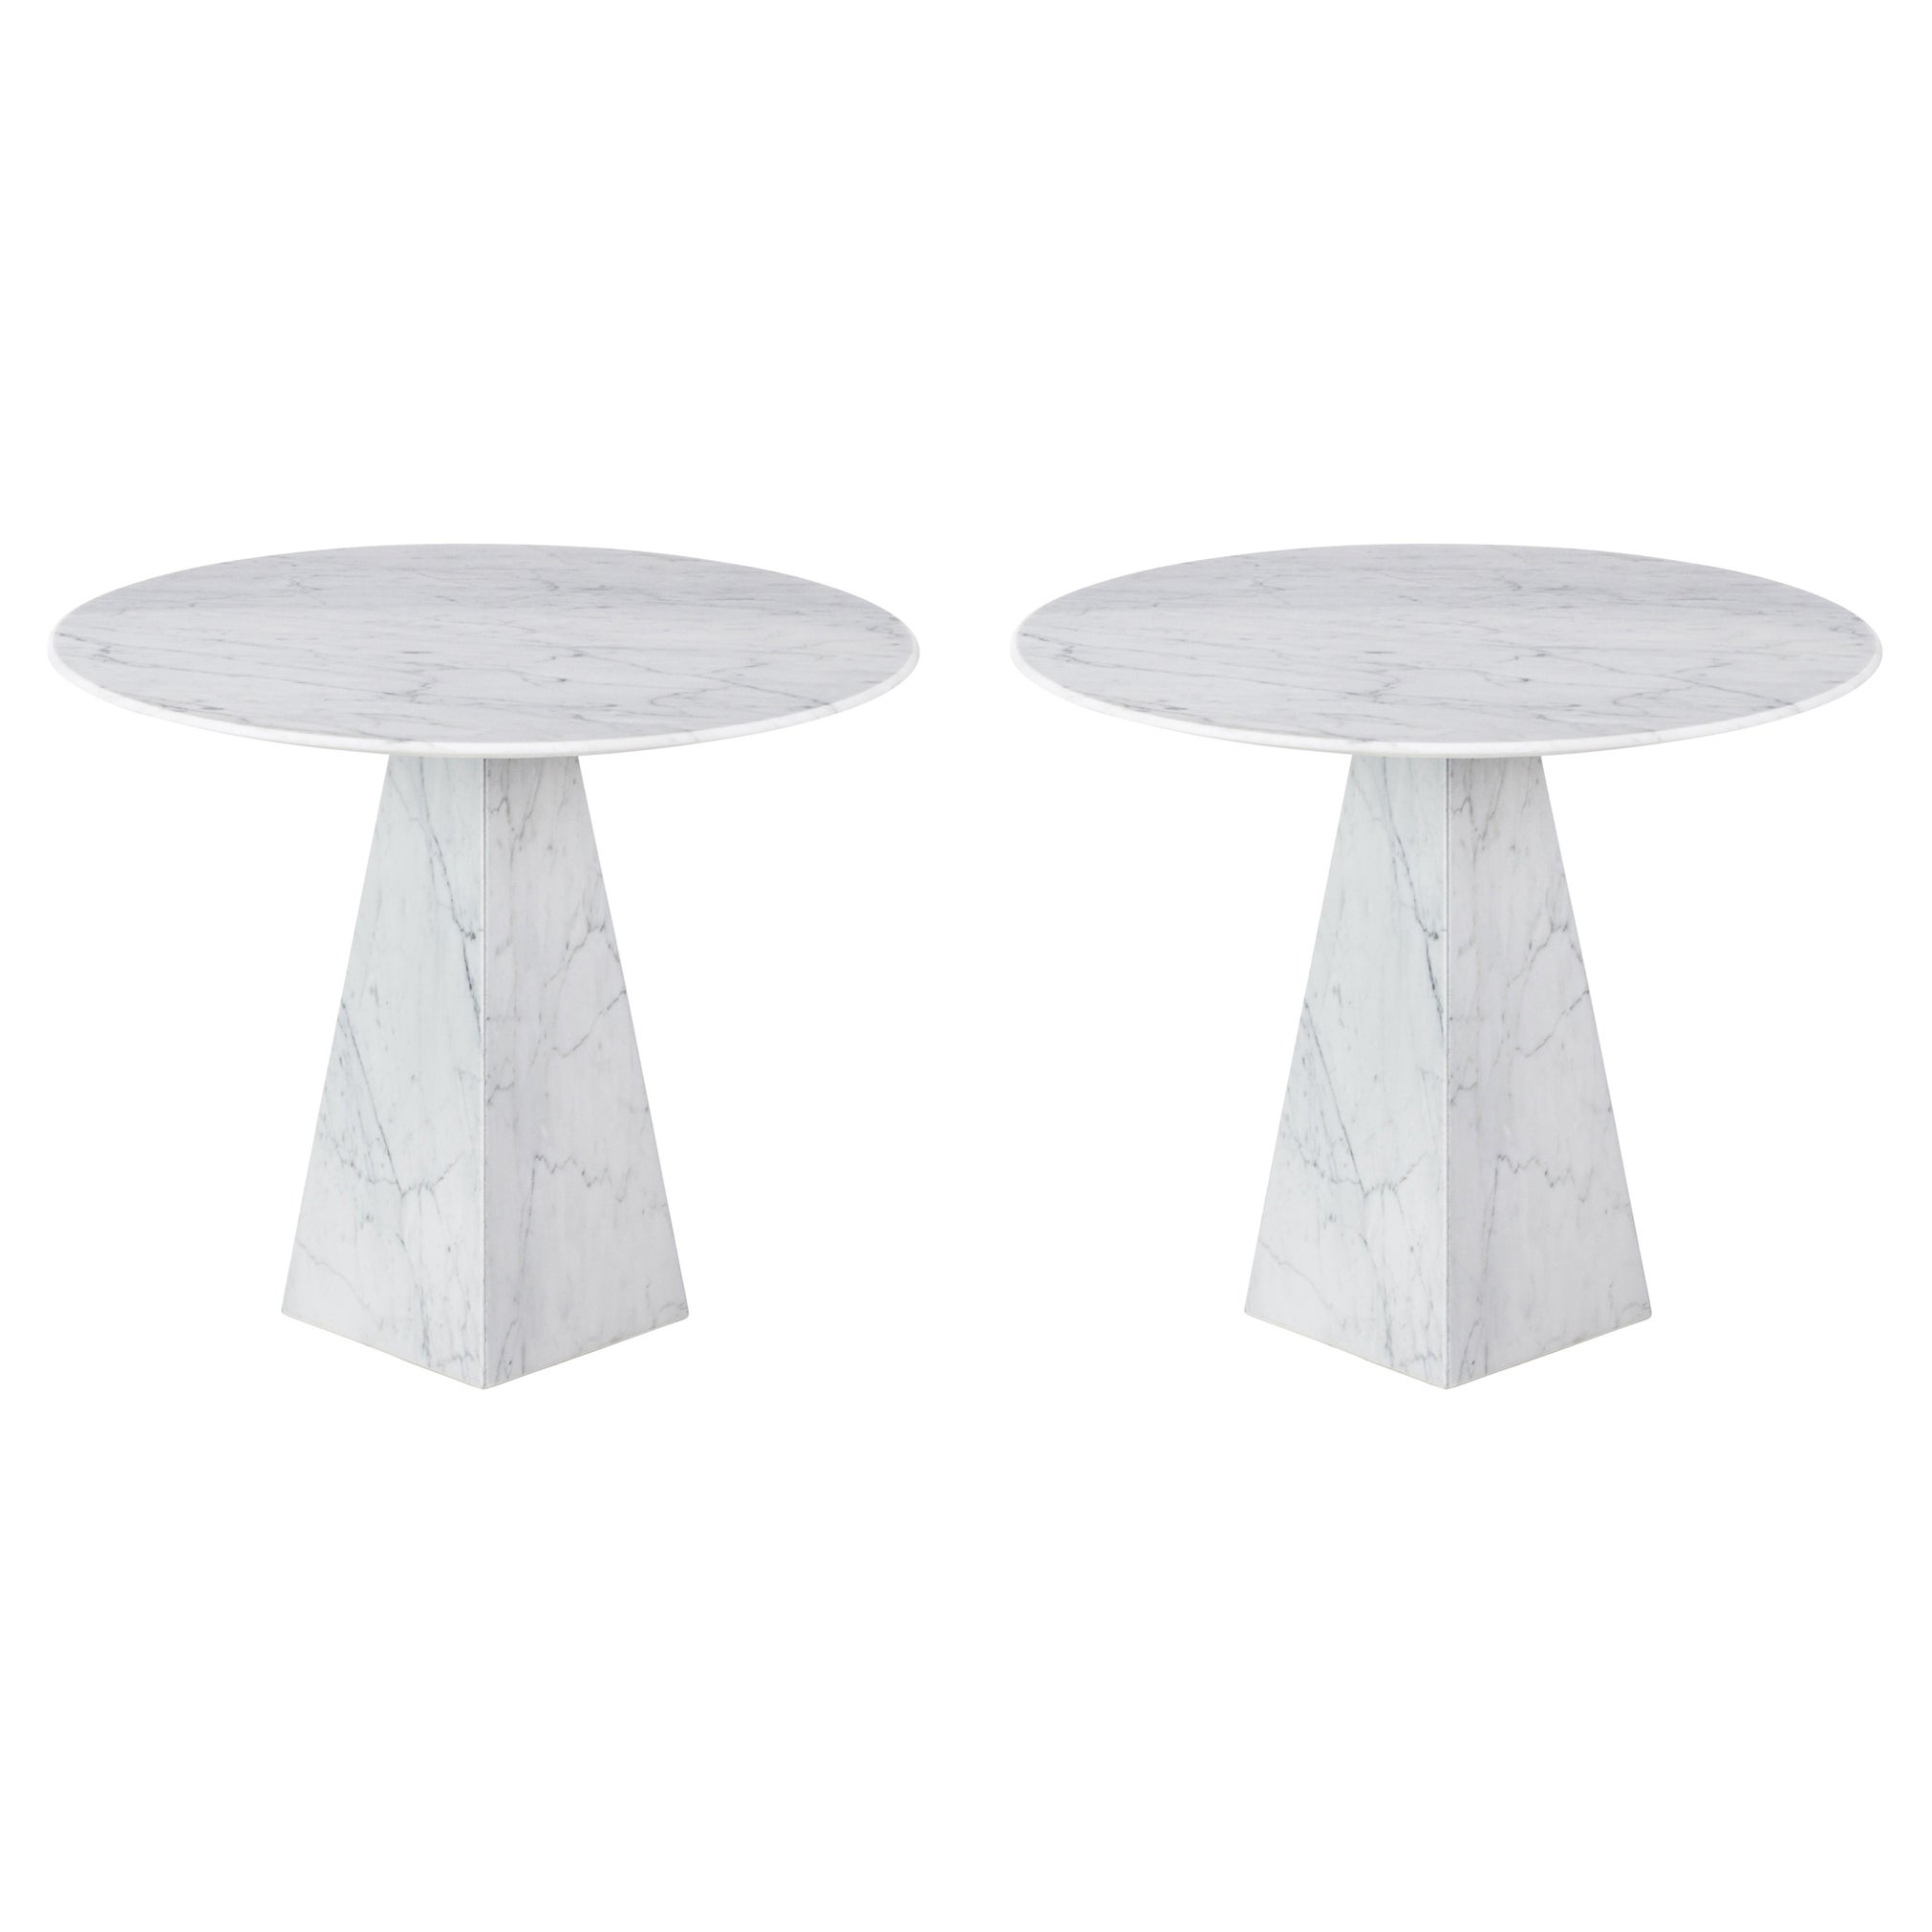 Pair of Ultra Thin White Carrara Marble Round Sidetables